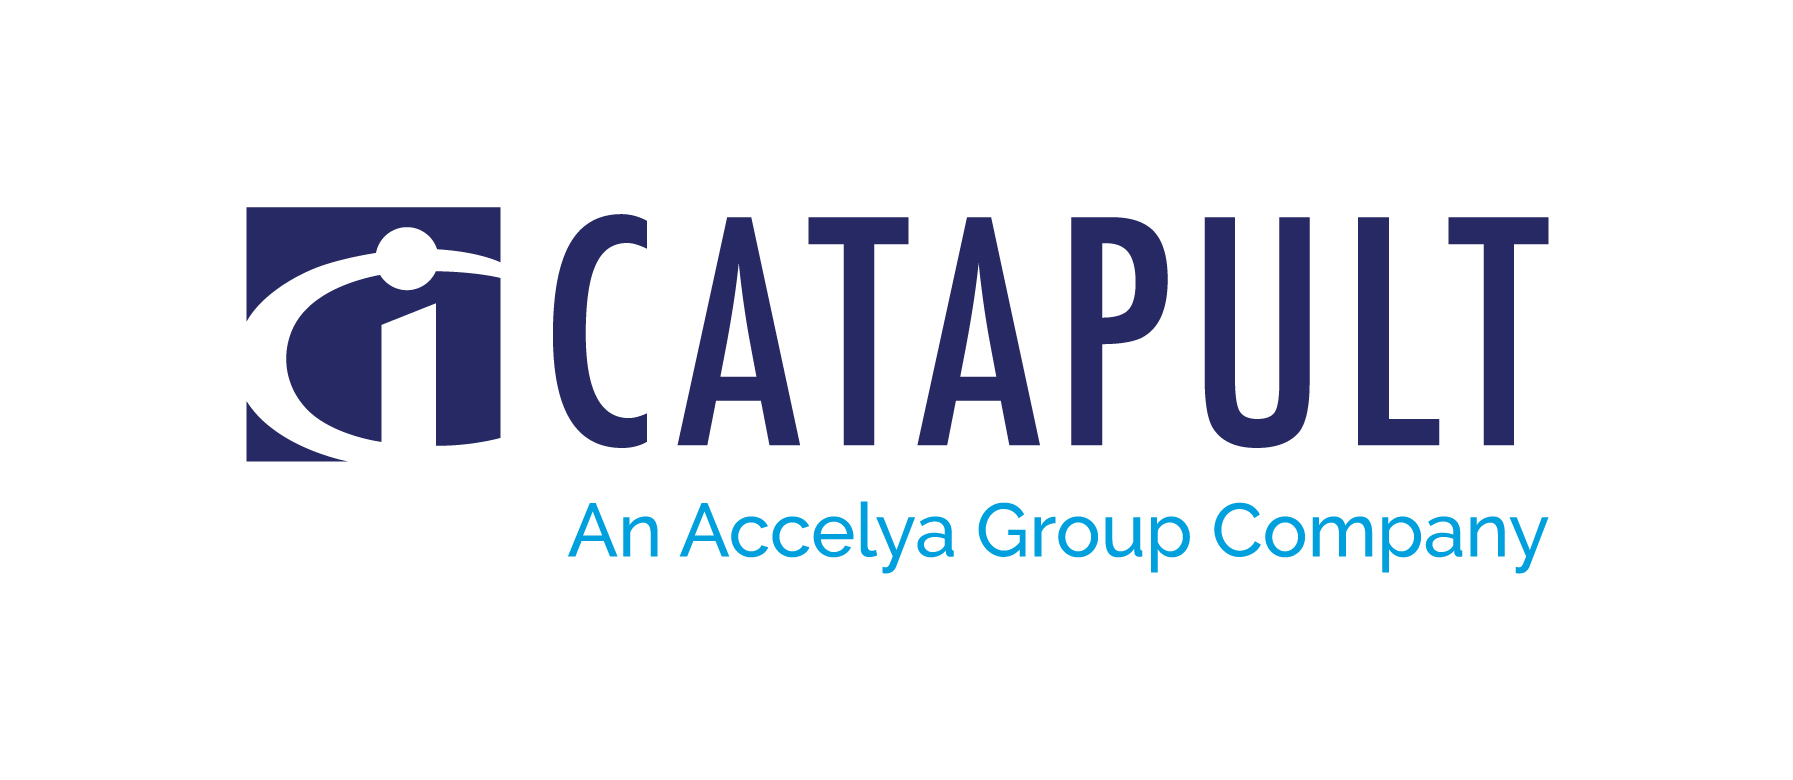 Catapult Adds Kerry 